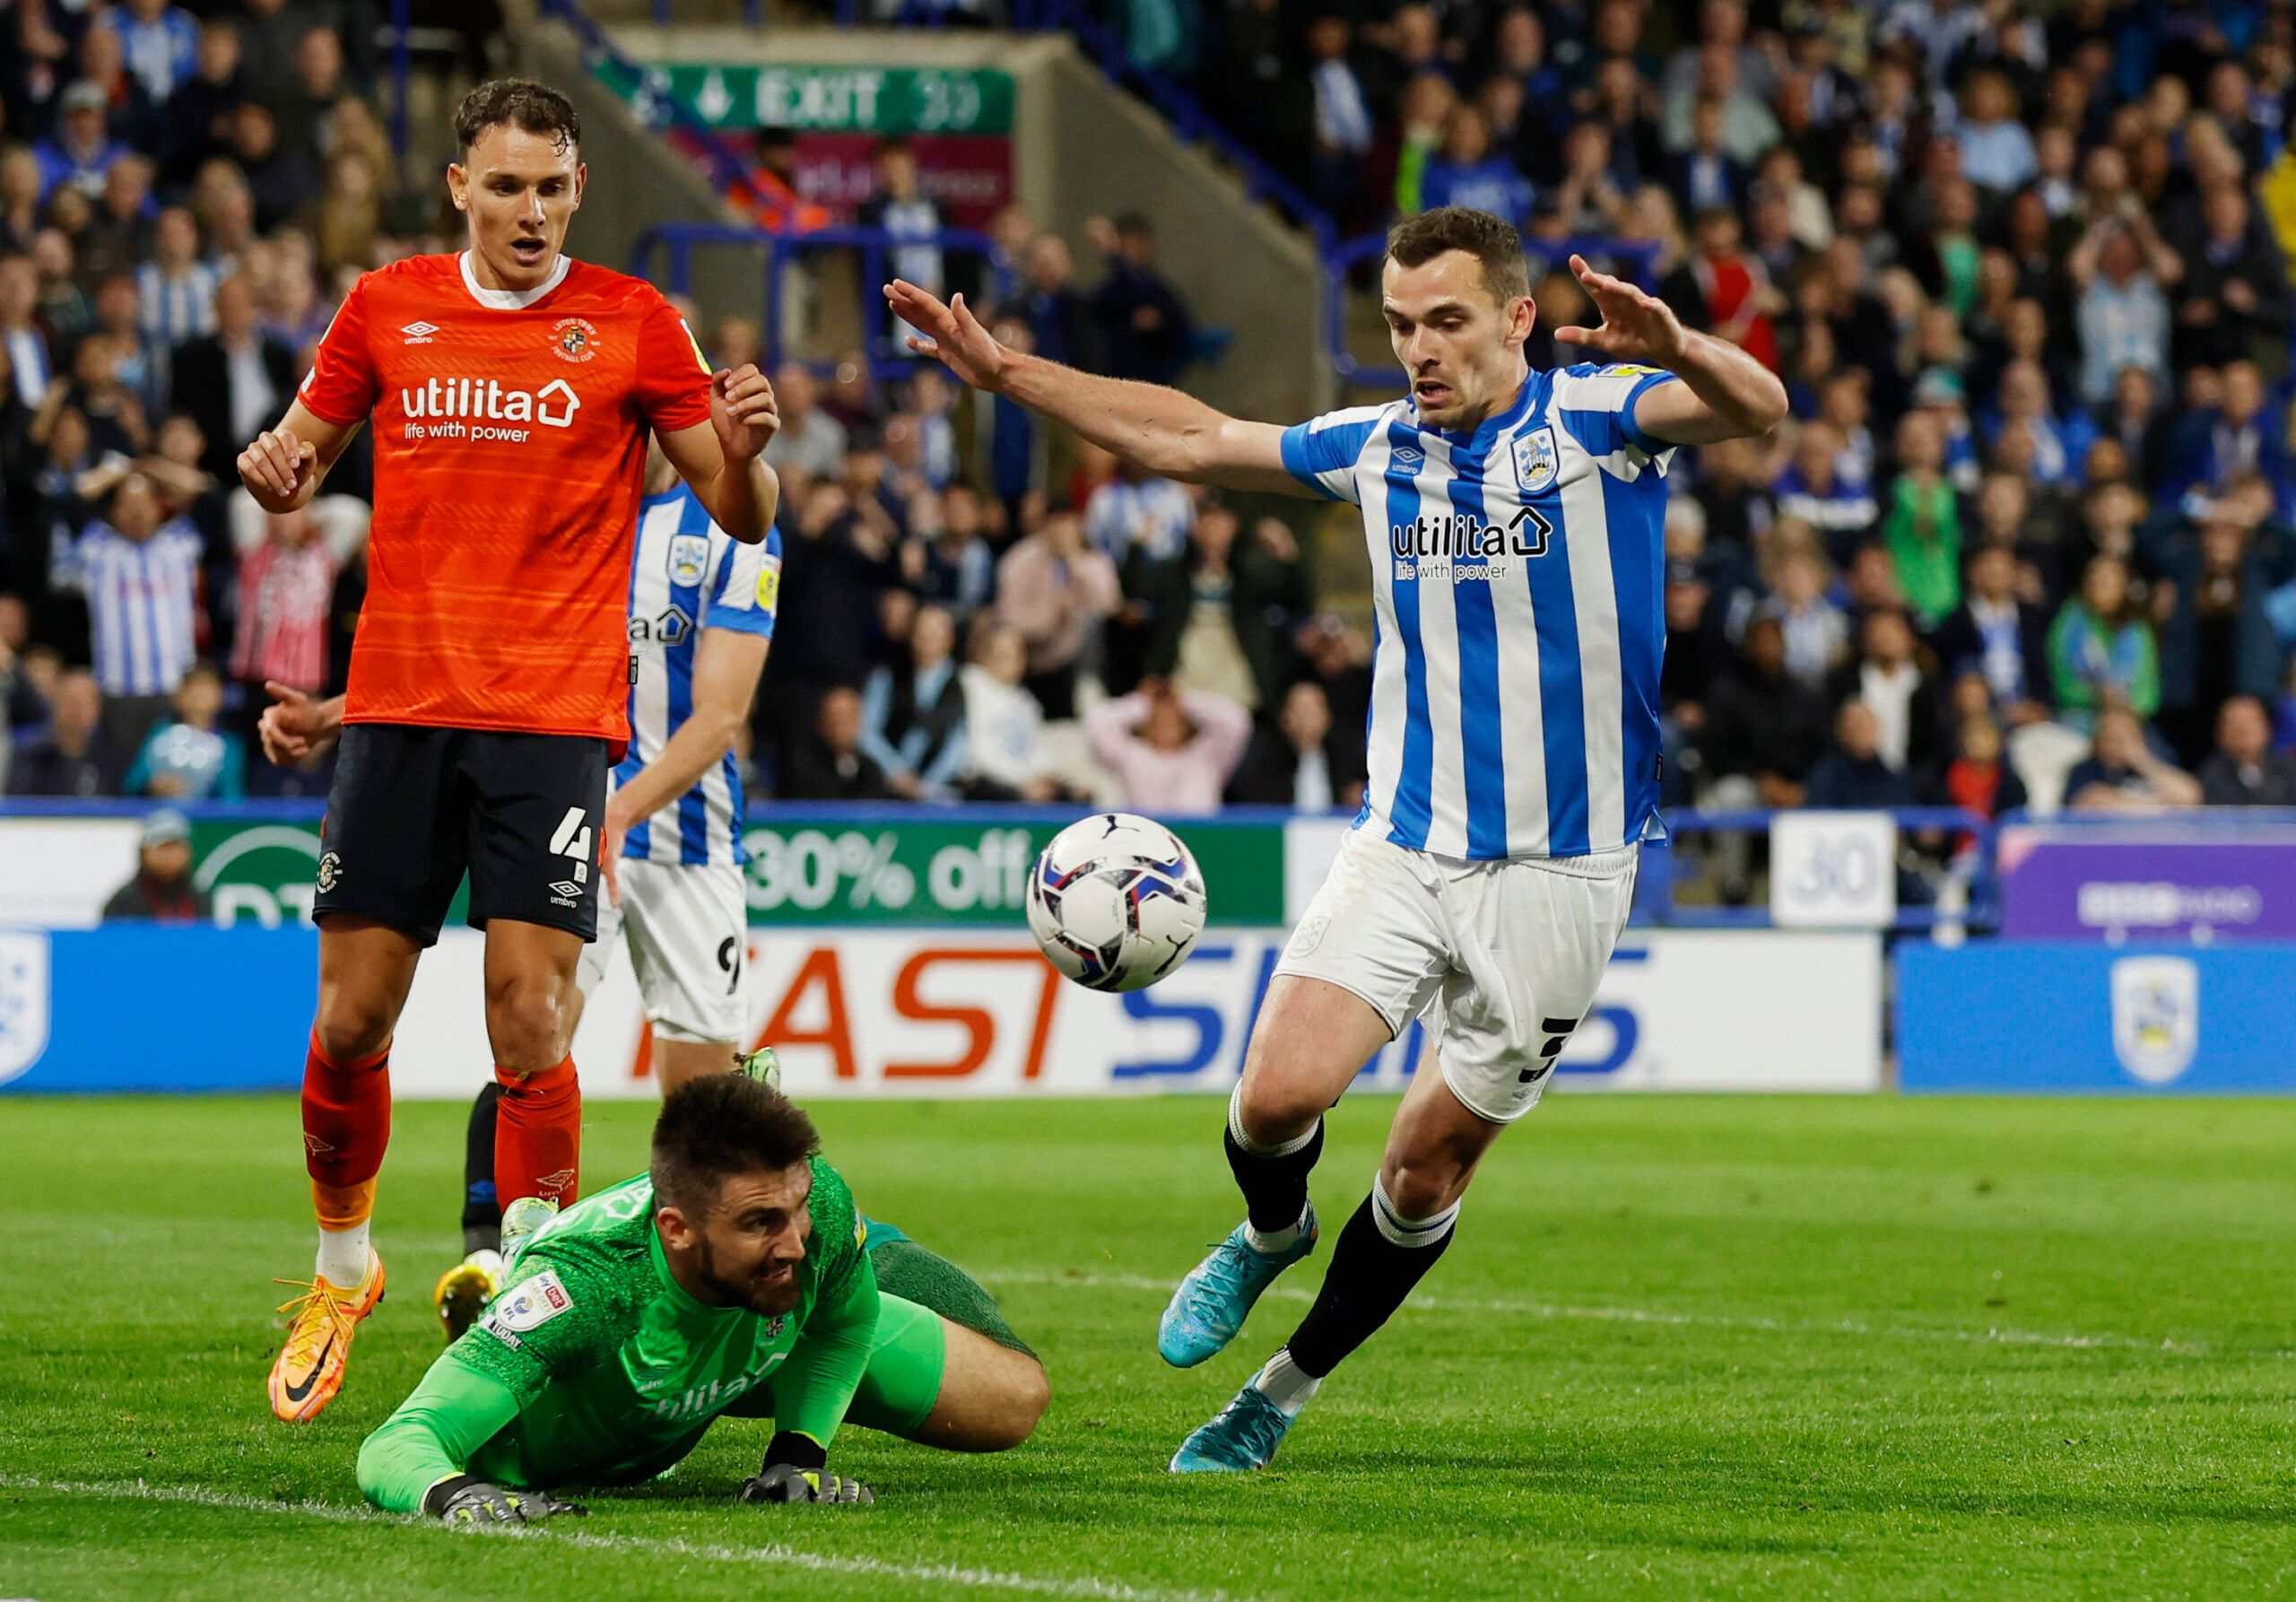 Soccer Football - Championship - Play-Offs Second Leg - Huddersfield Town v Luton Town - John Smith's Stadium, Huddersfield, Britain - May 16, 2022 Luton Town's Matt Ingram in action with Huddersfield Town's Harry Toffolo Action Images via Reuters/Jason Cairnduff